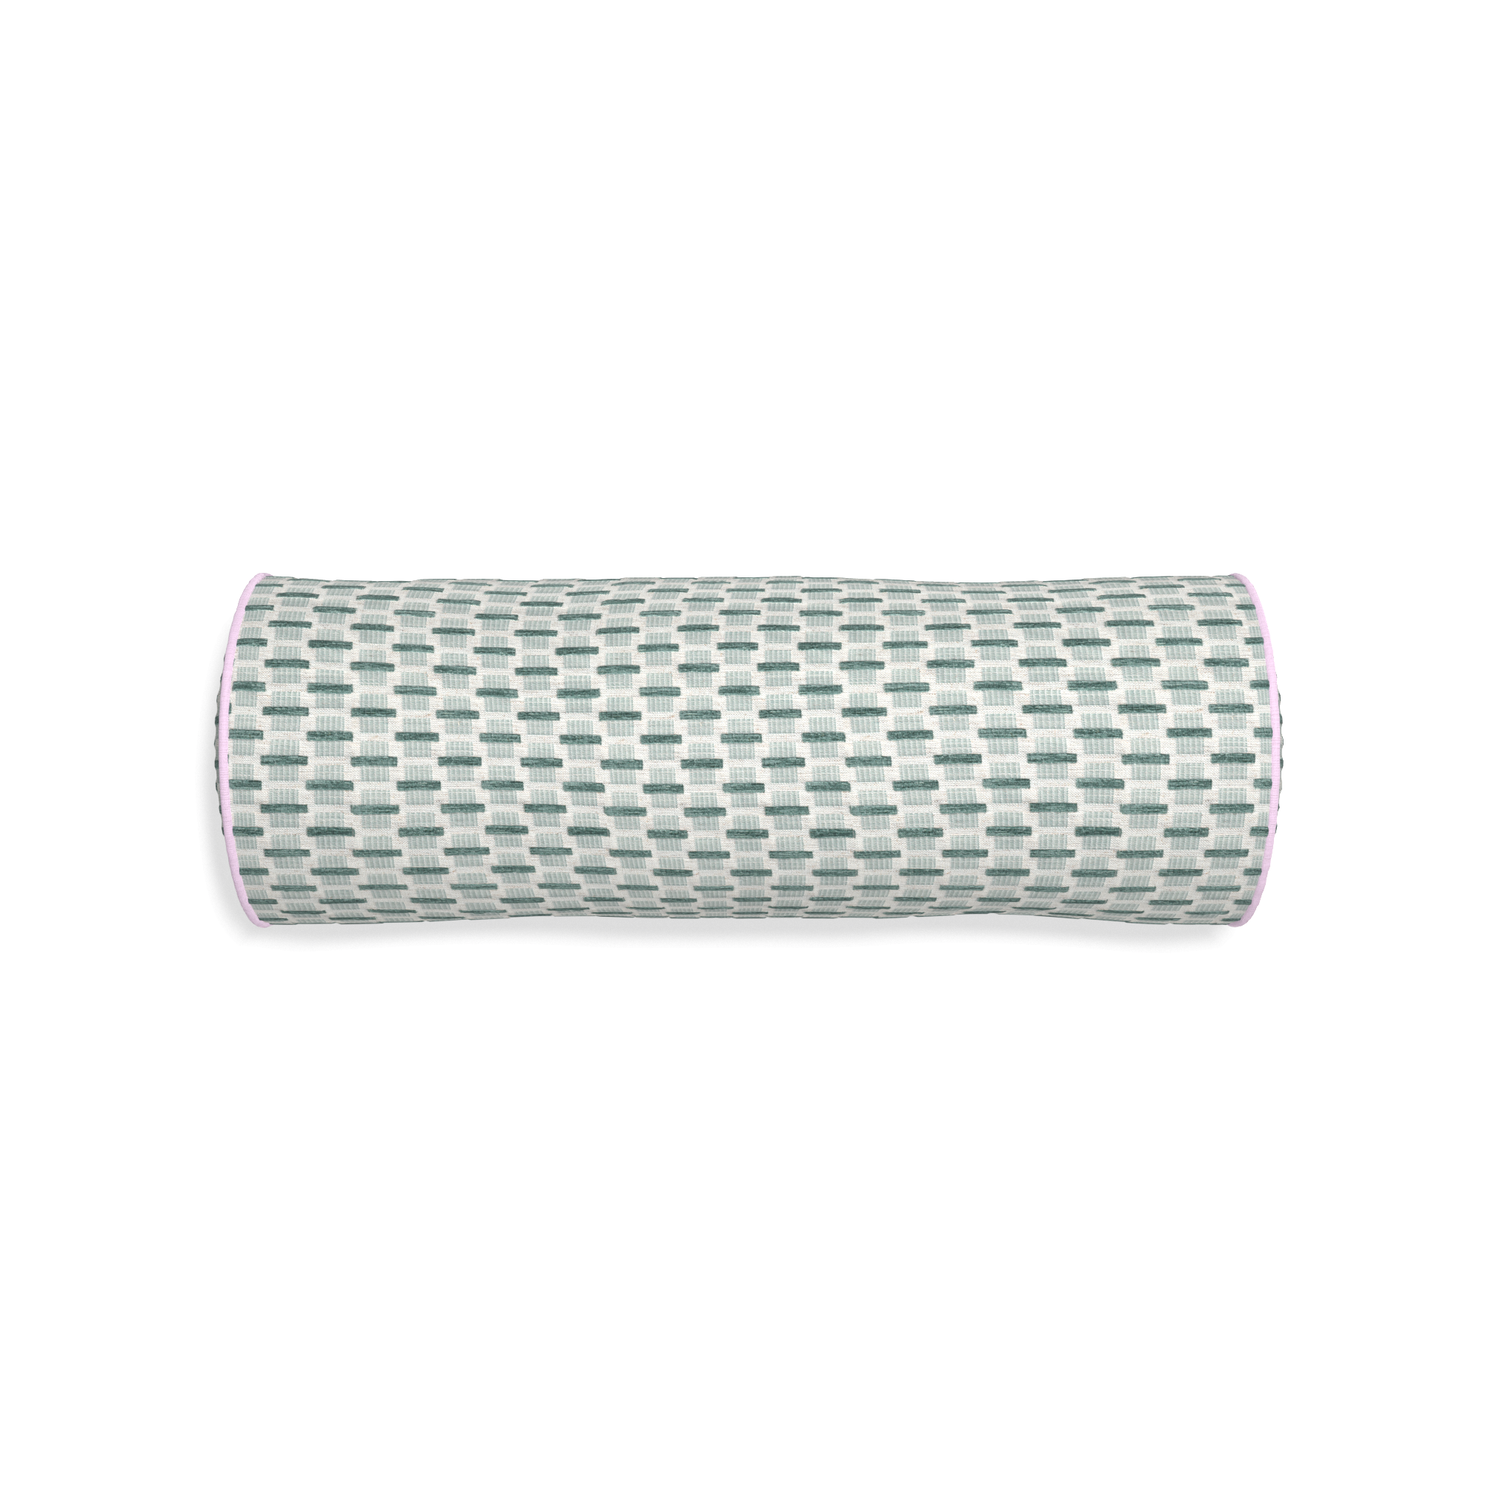 Bolster willow mint custom green geometric chenillepillow with l piping on white background